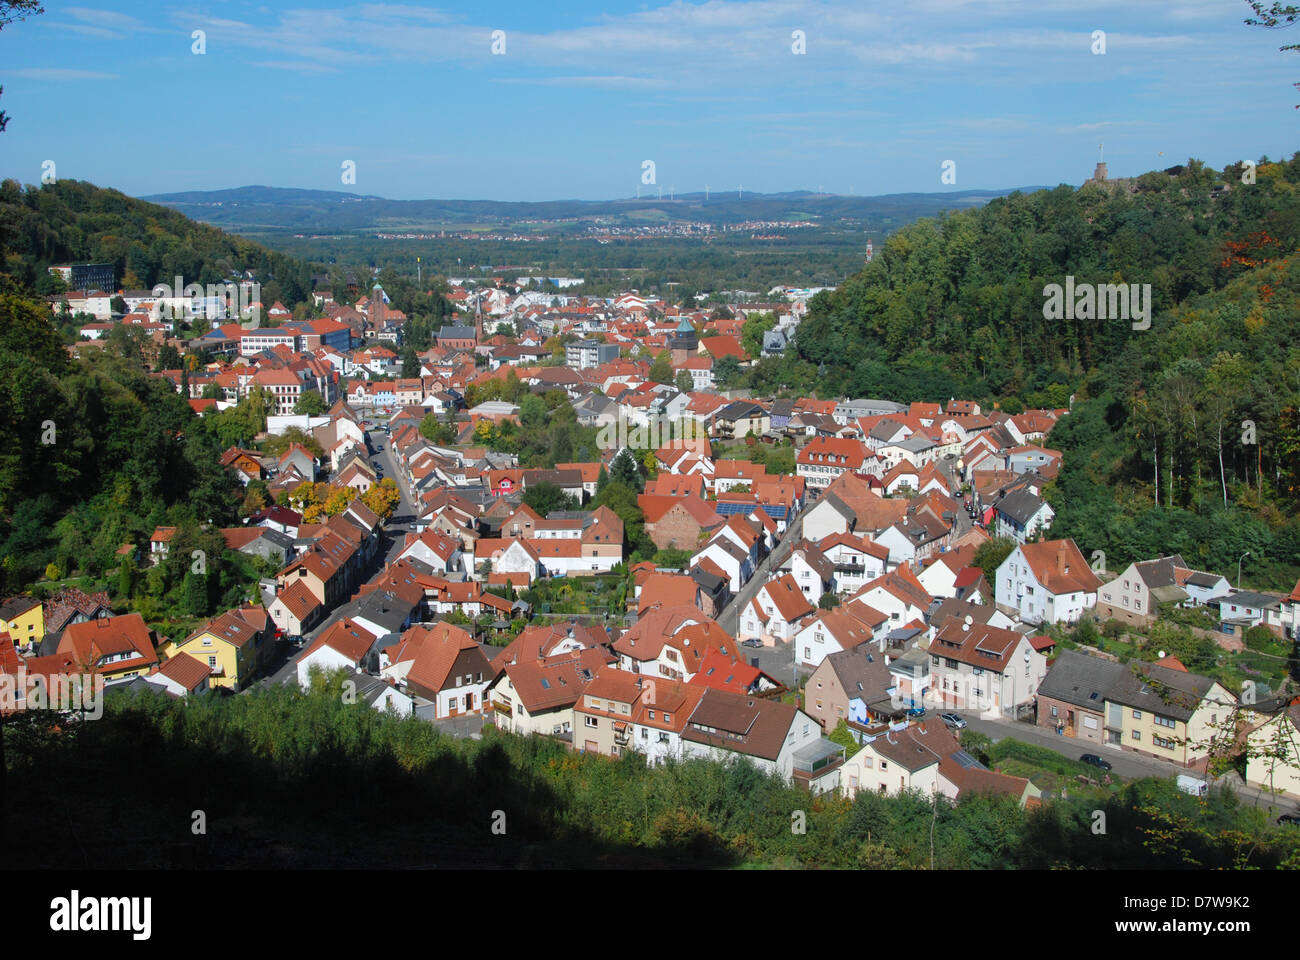 German town of Landstuhl seen from above Stock Photo